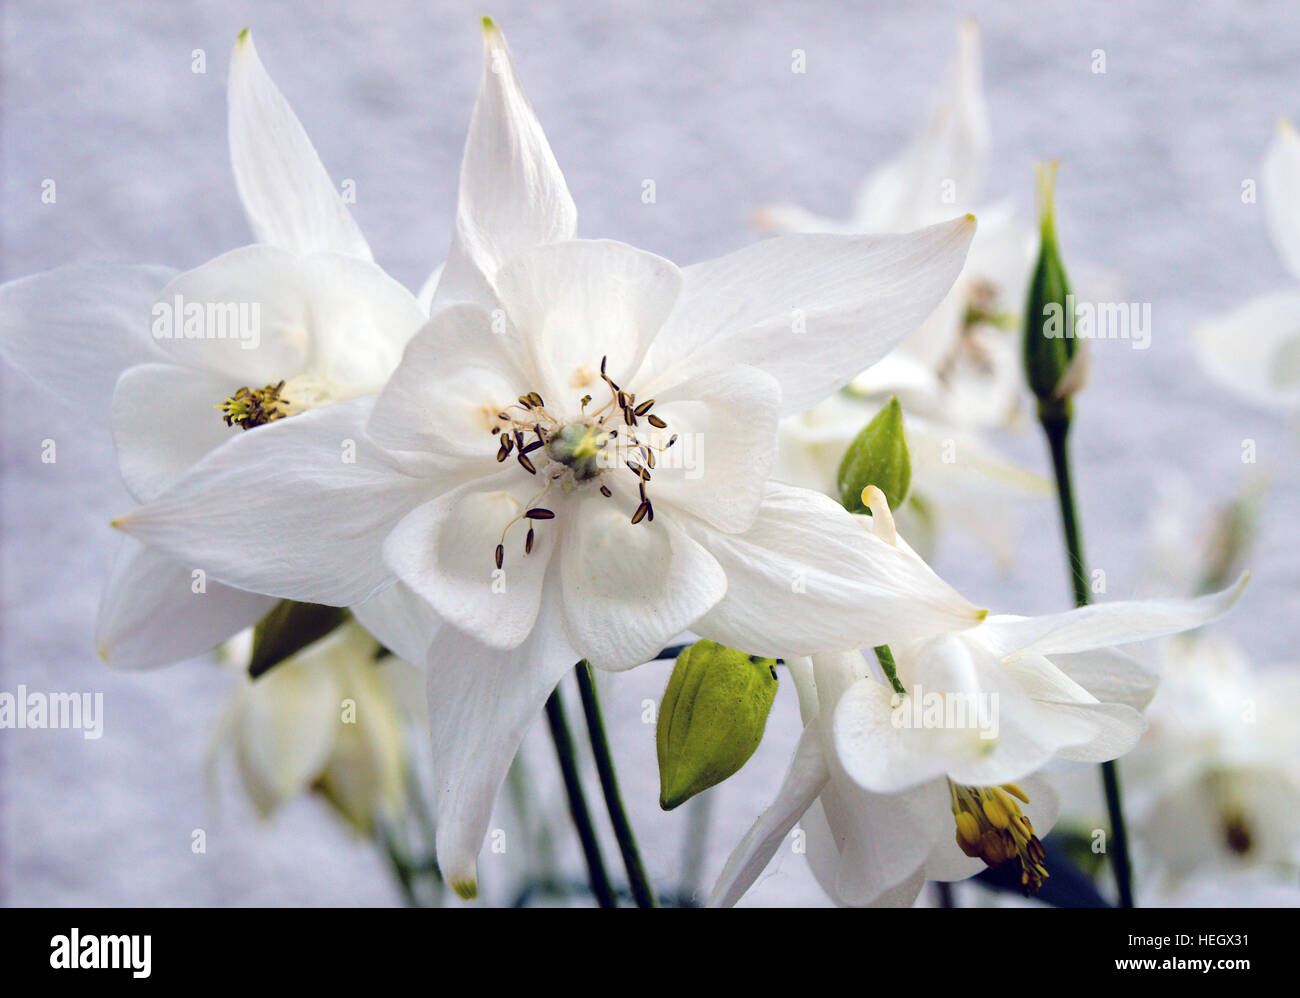 White Aquilegia flowers in bloom in a country garden. Stock Photo